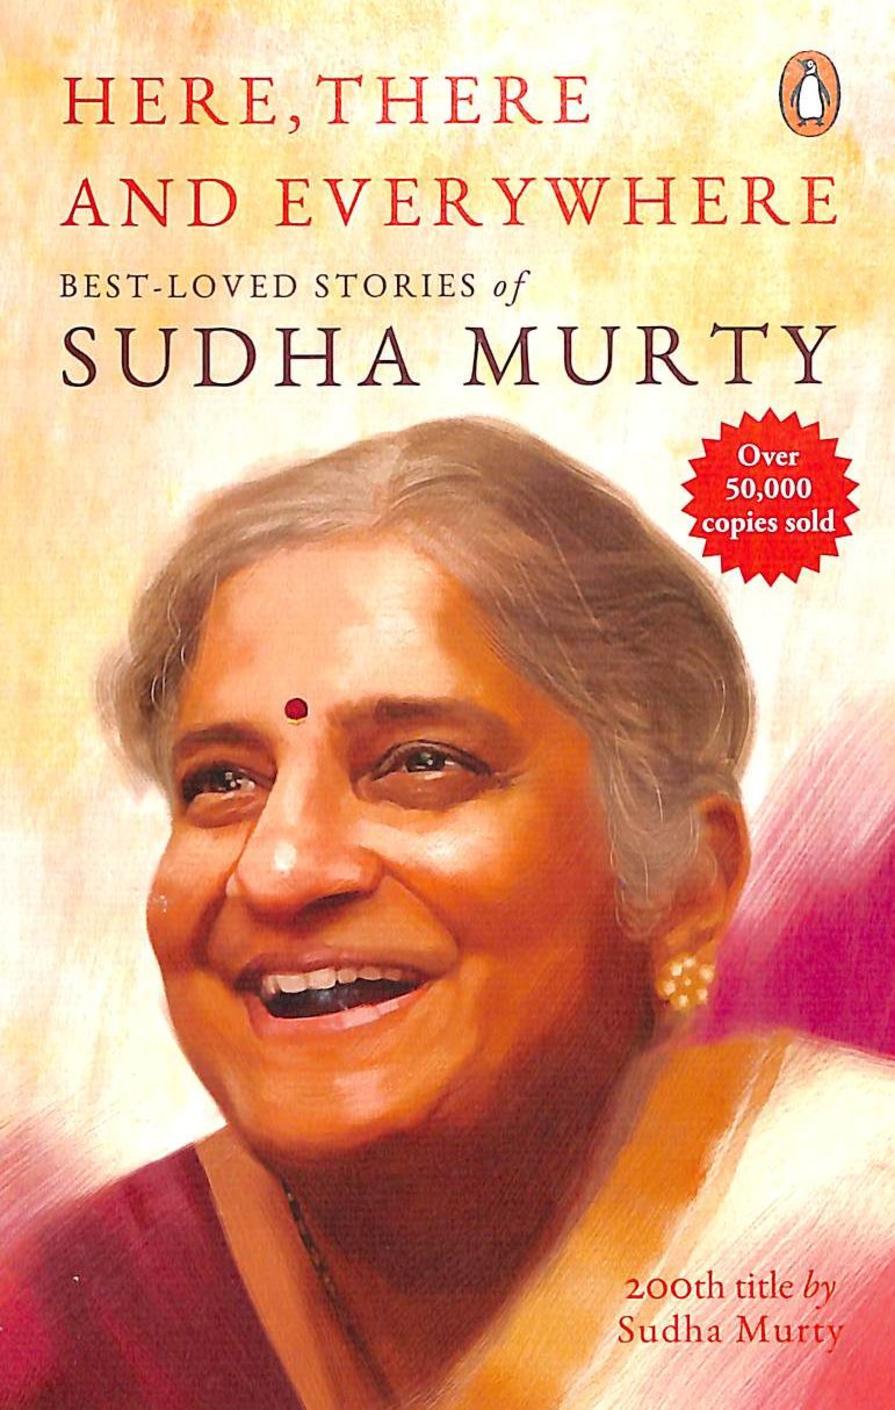 book review of sudha murthy stories